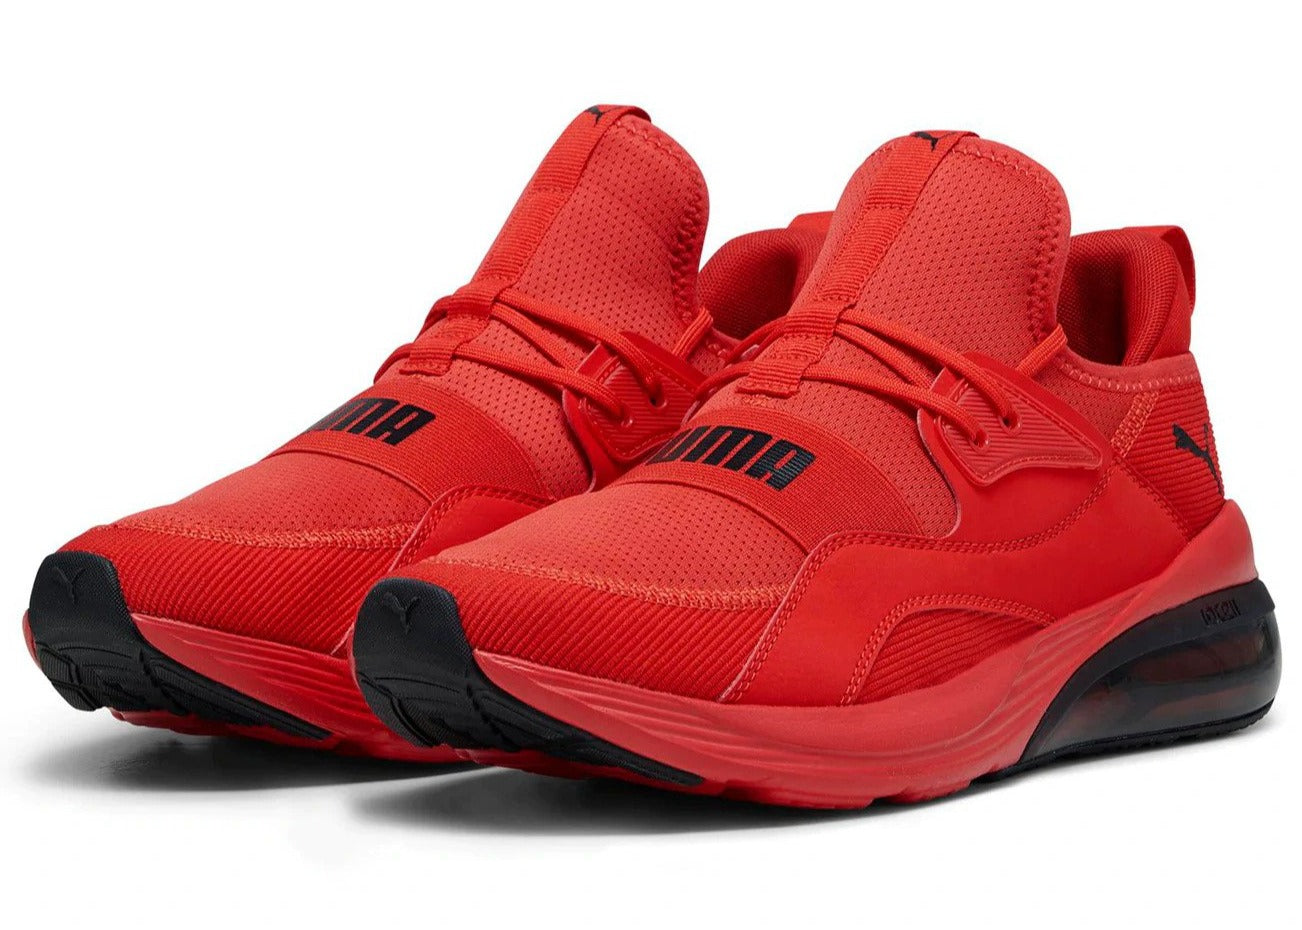 Puma Men's Cell Vive Intake Running Shoes - Red/Black